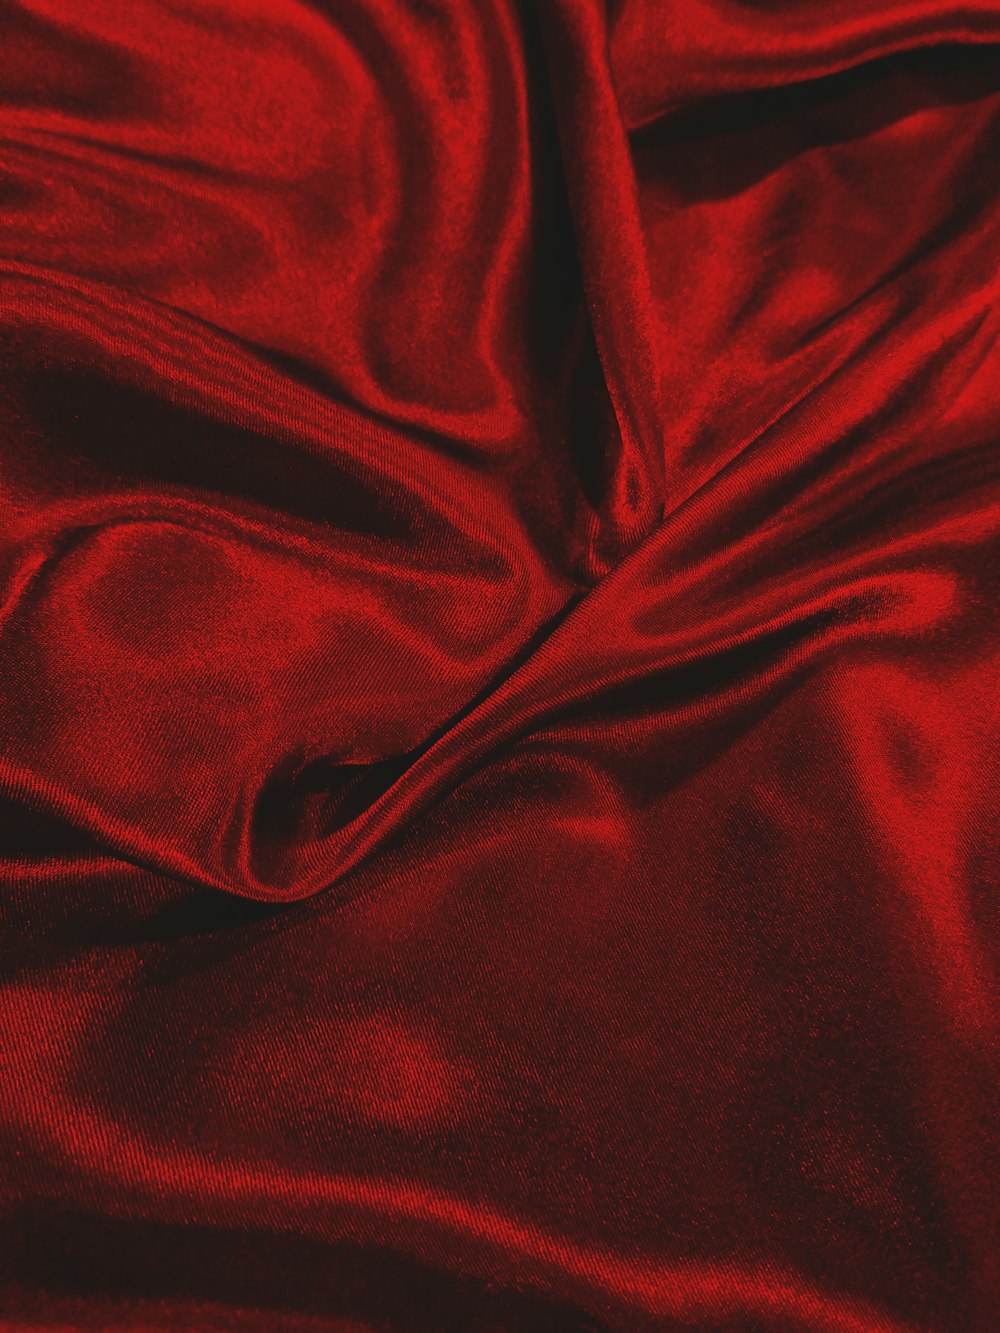 Red Silk Pictures  Download Free Images on Unsplash